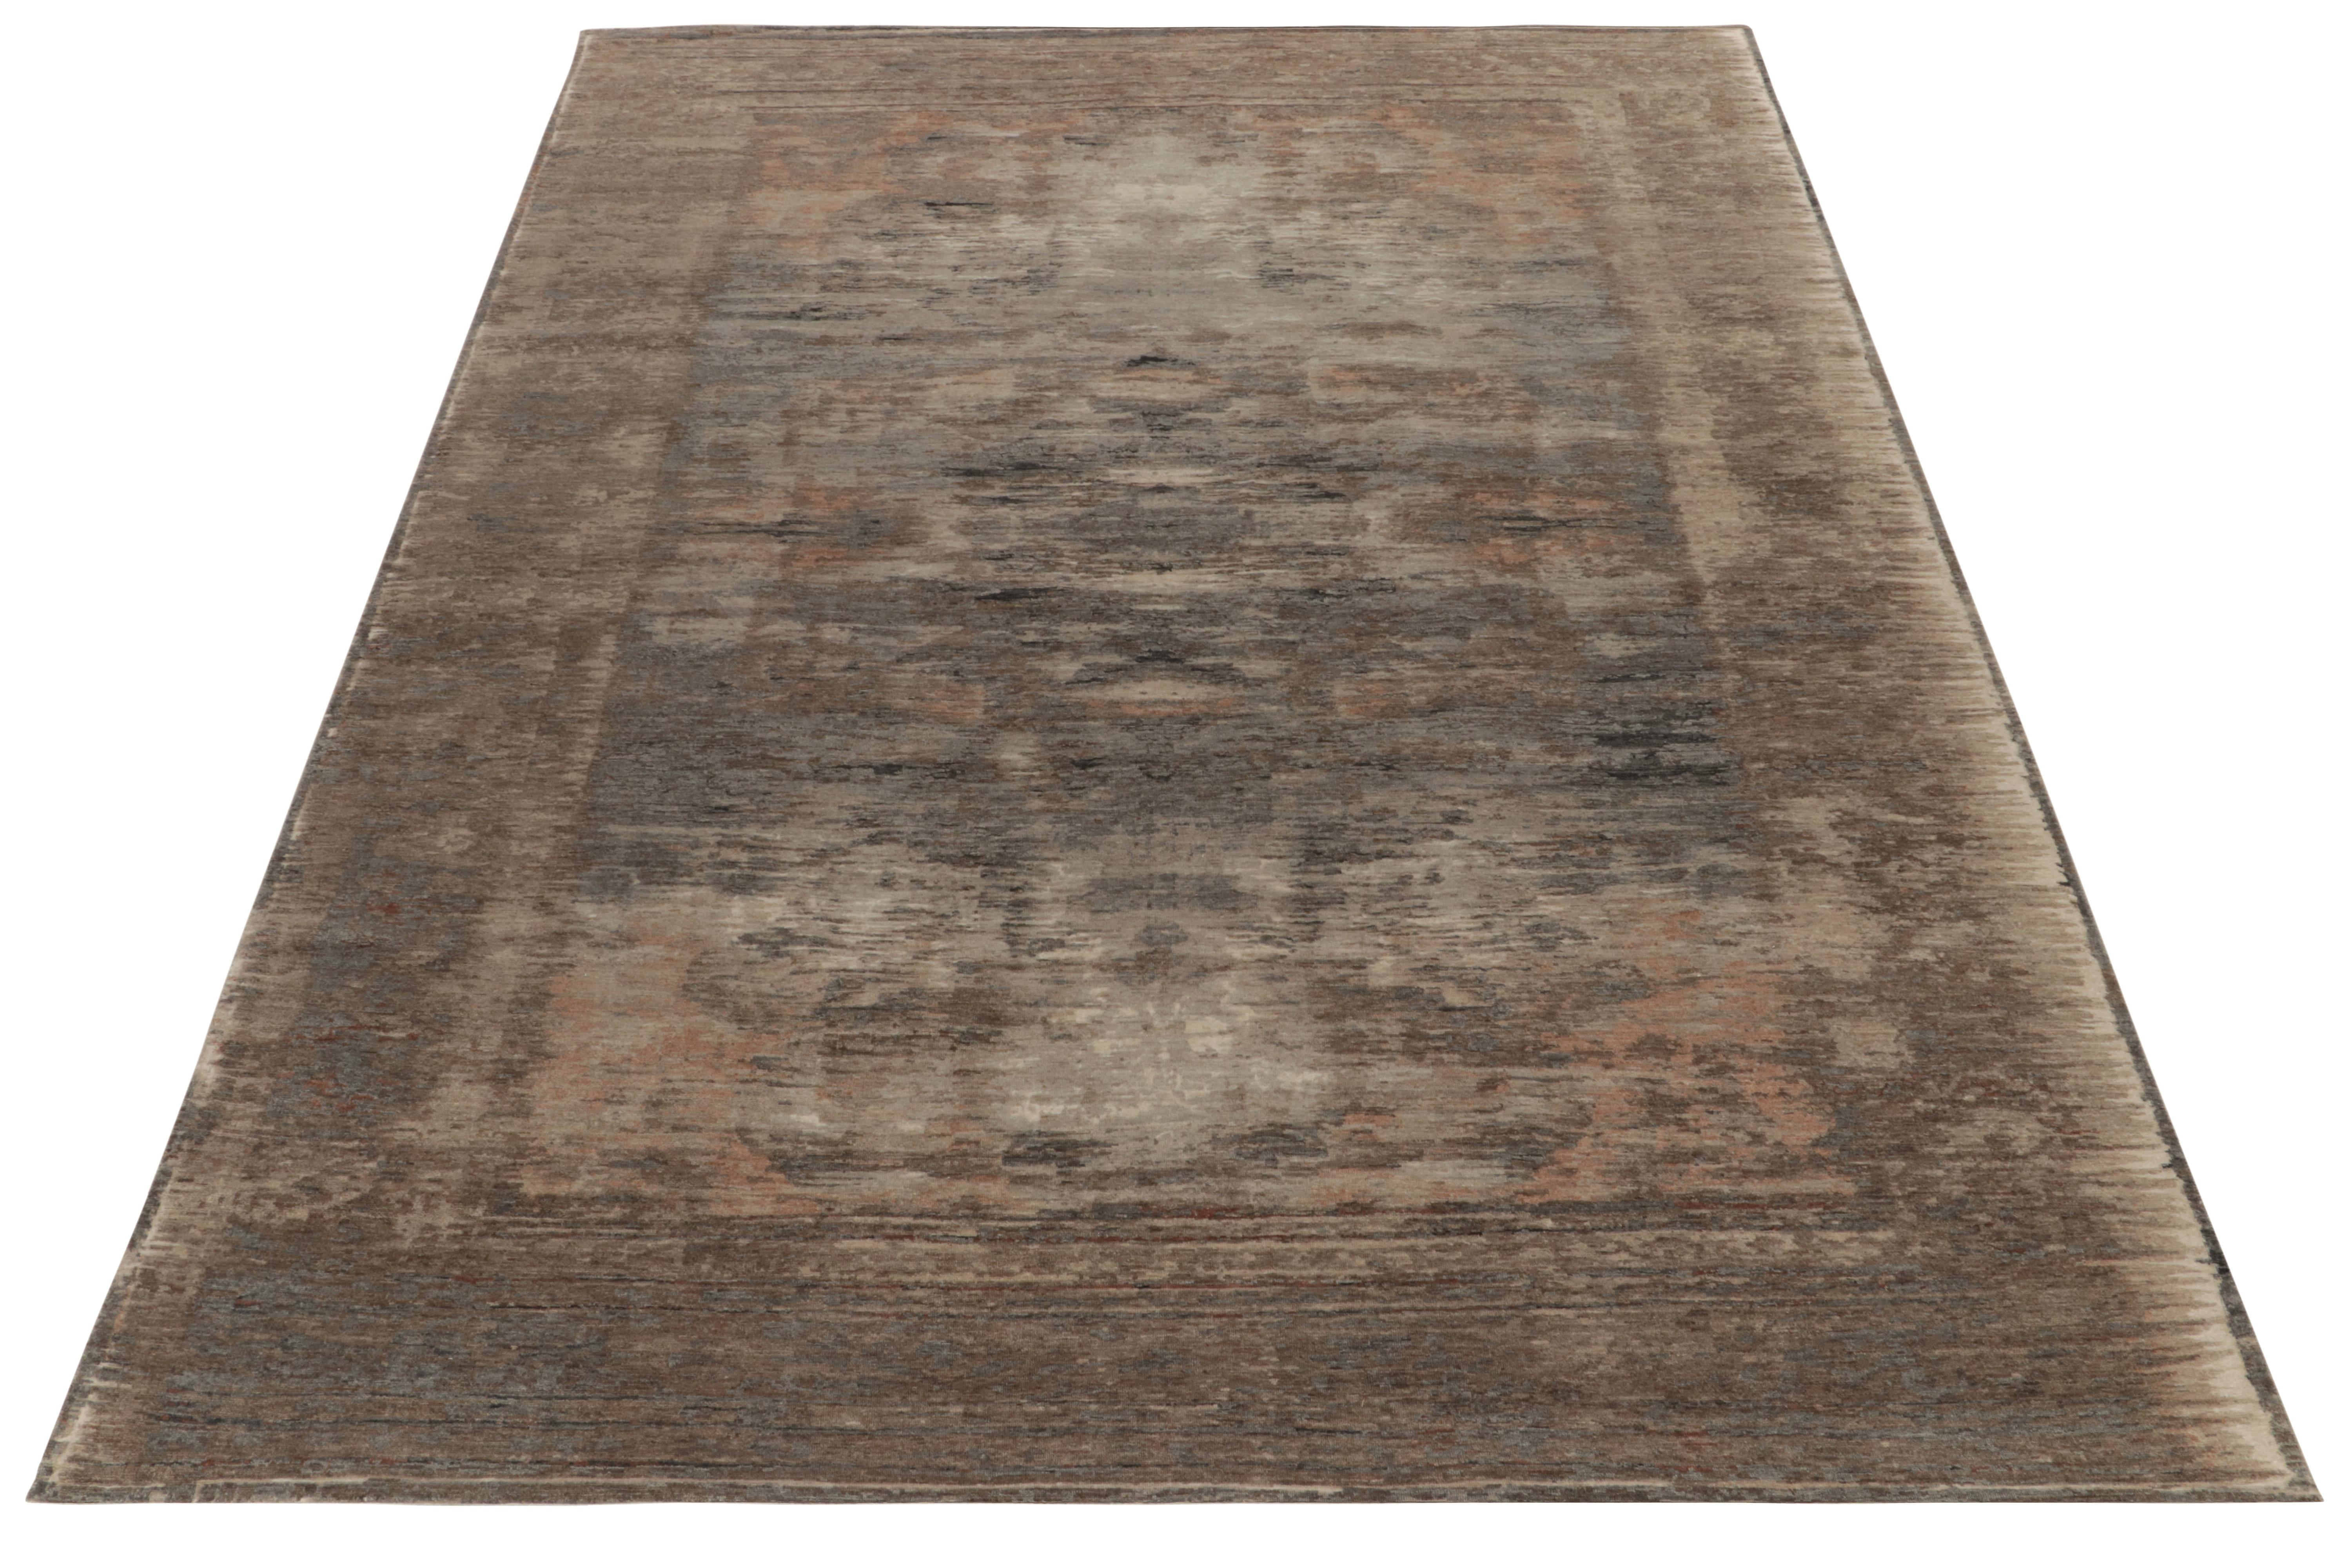 Marking a sophisticated take on contemporary style, Rug & Kilim presents a 9x12 modern rug of abstract aesthetics in silver gray, beige, brown for tonal balance accompanying subtle sheen lent by the natural luster of silk & wool blend. Visually